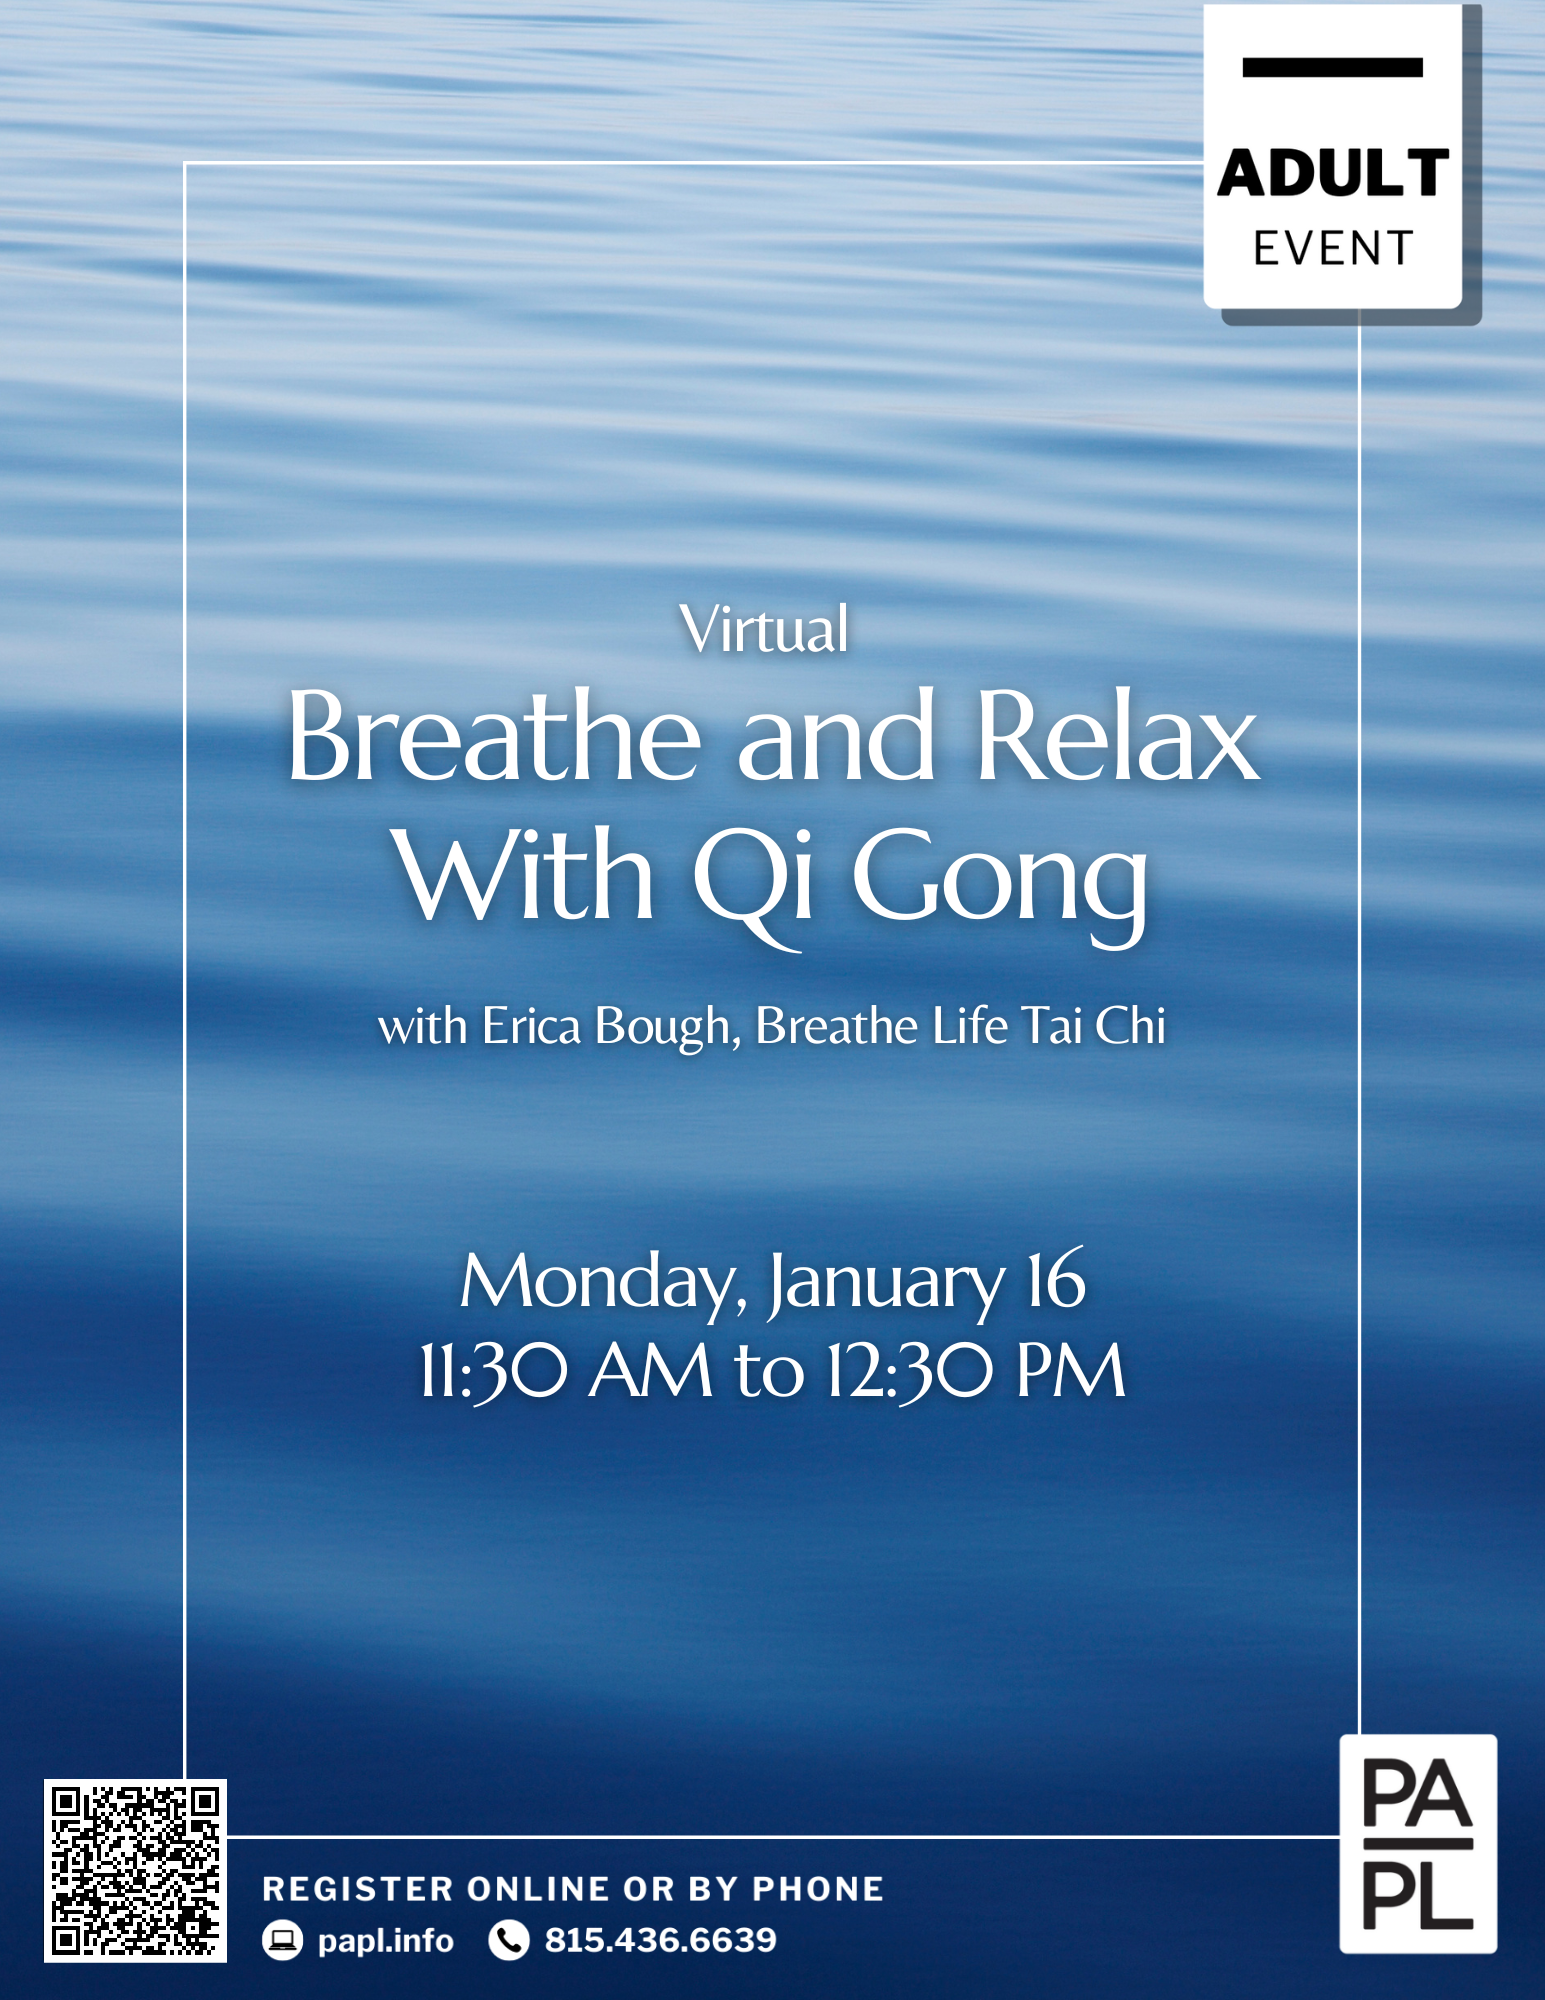 Virtual Breathe and Relax With Qi Gong